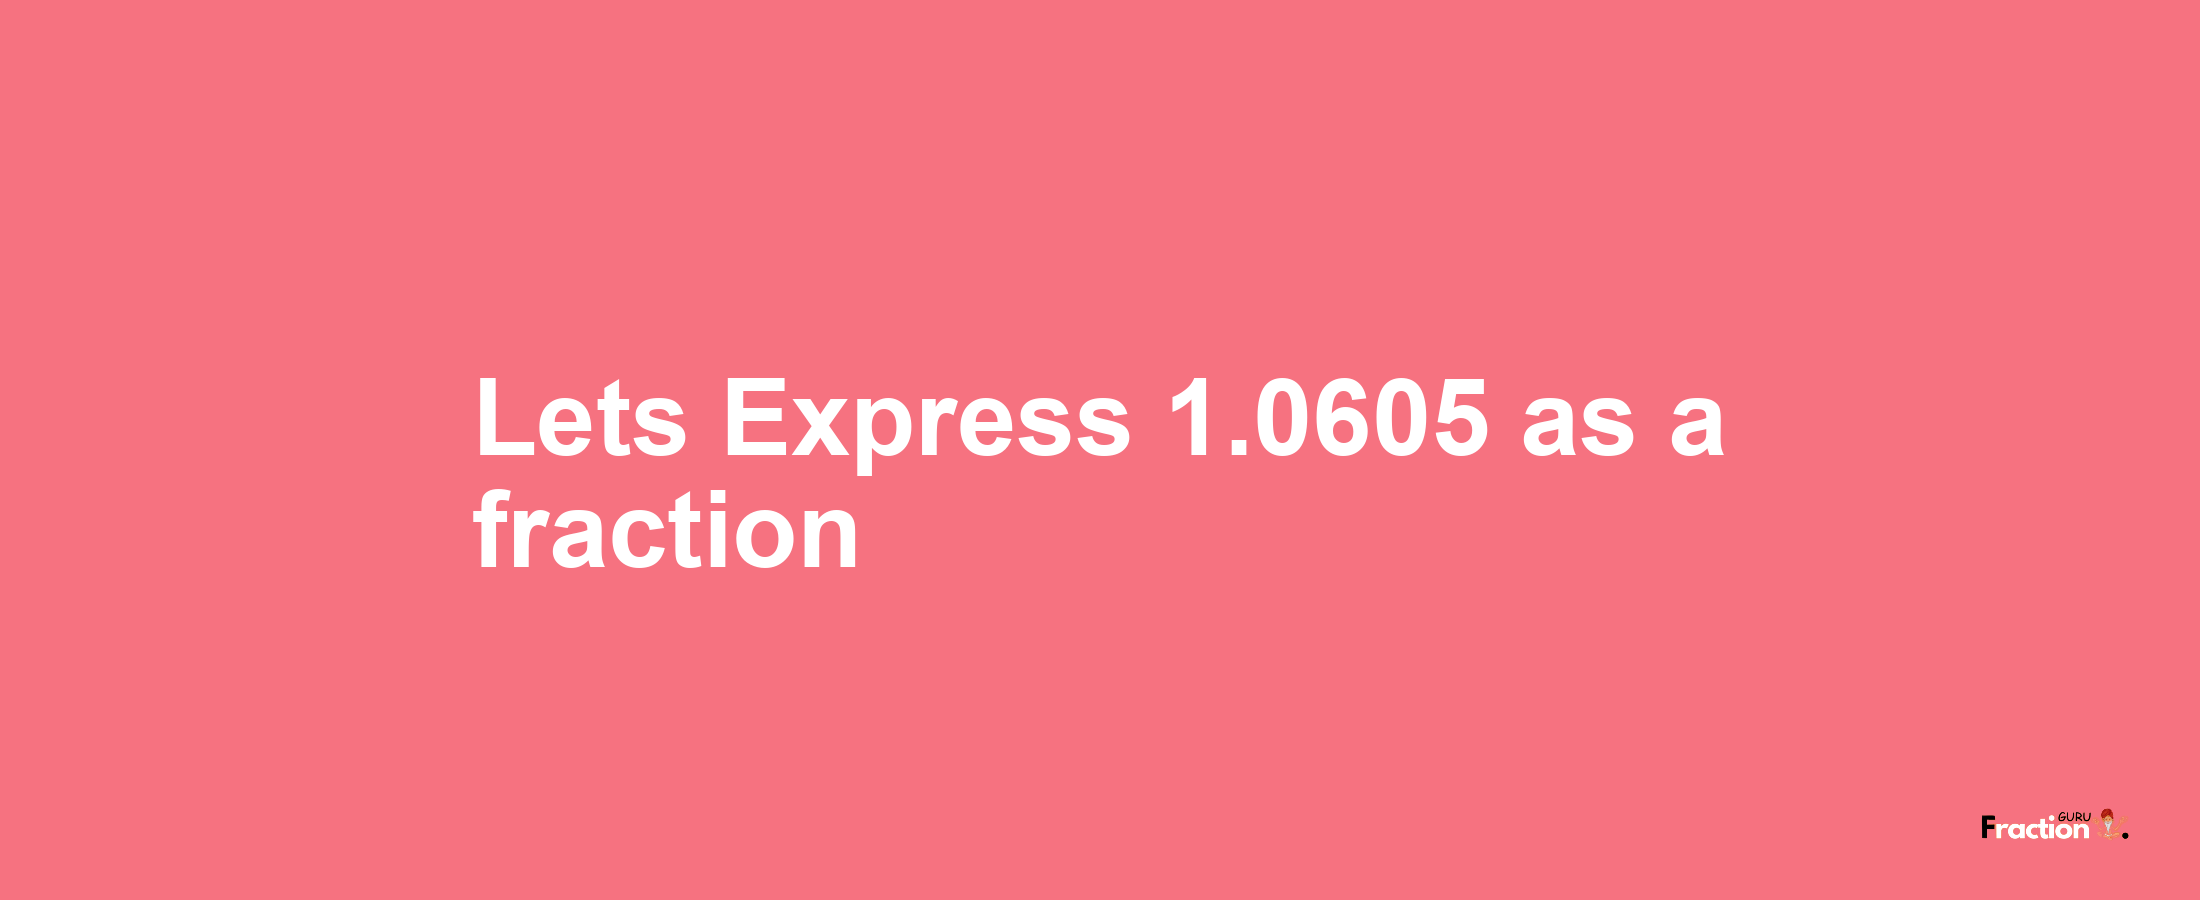 Lets Express 1.0605 as afraction